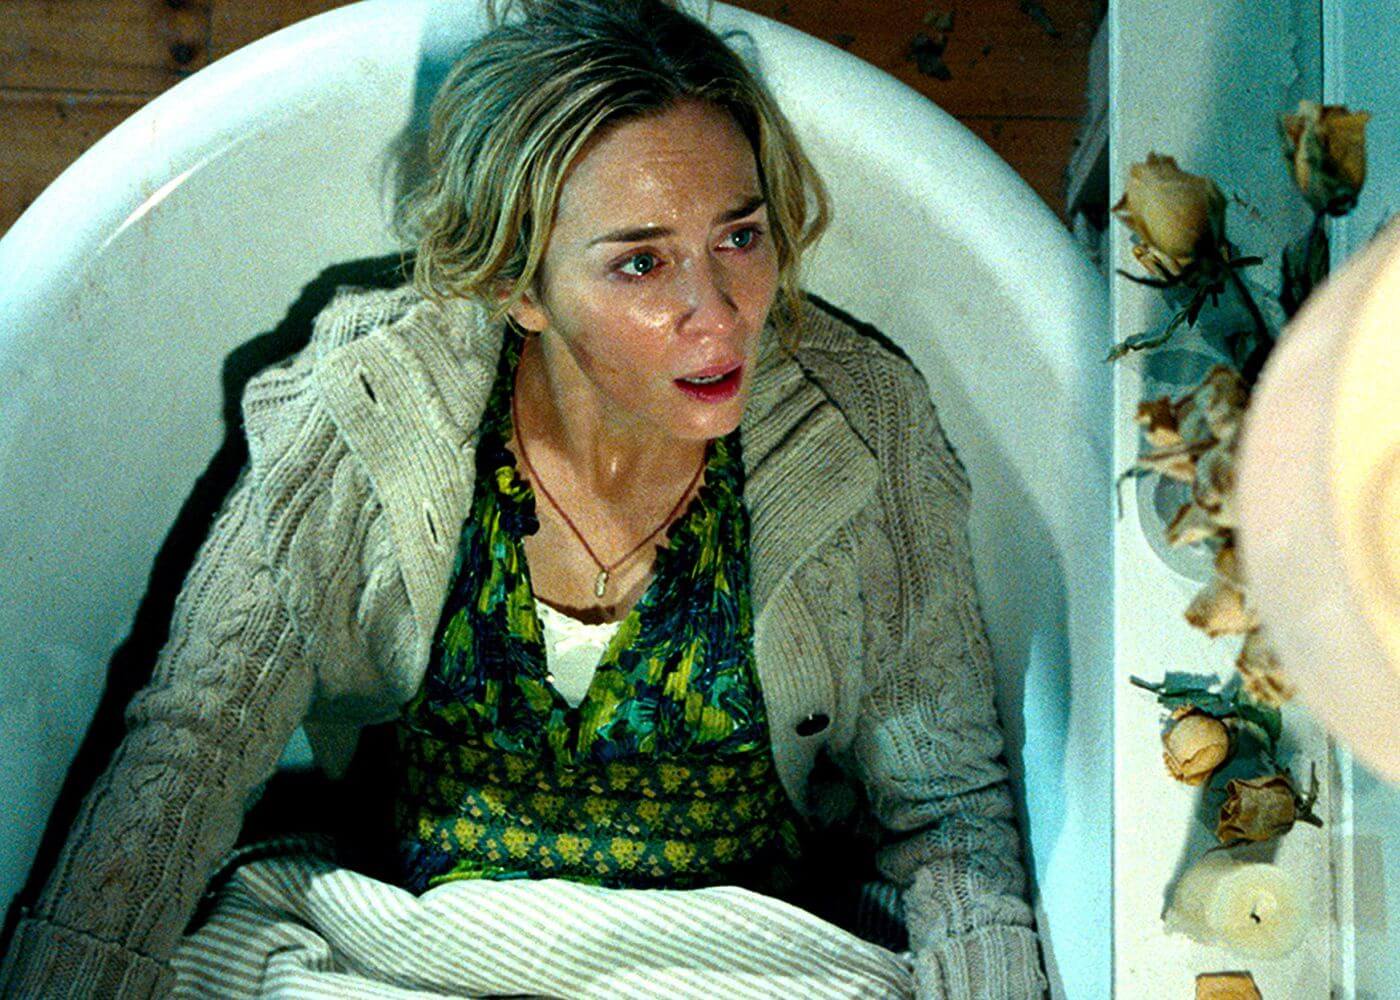 A Quiet Place prequel is titled Day One, release date delayed